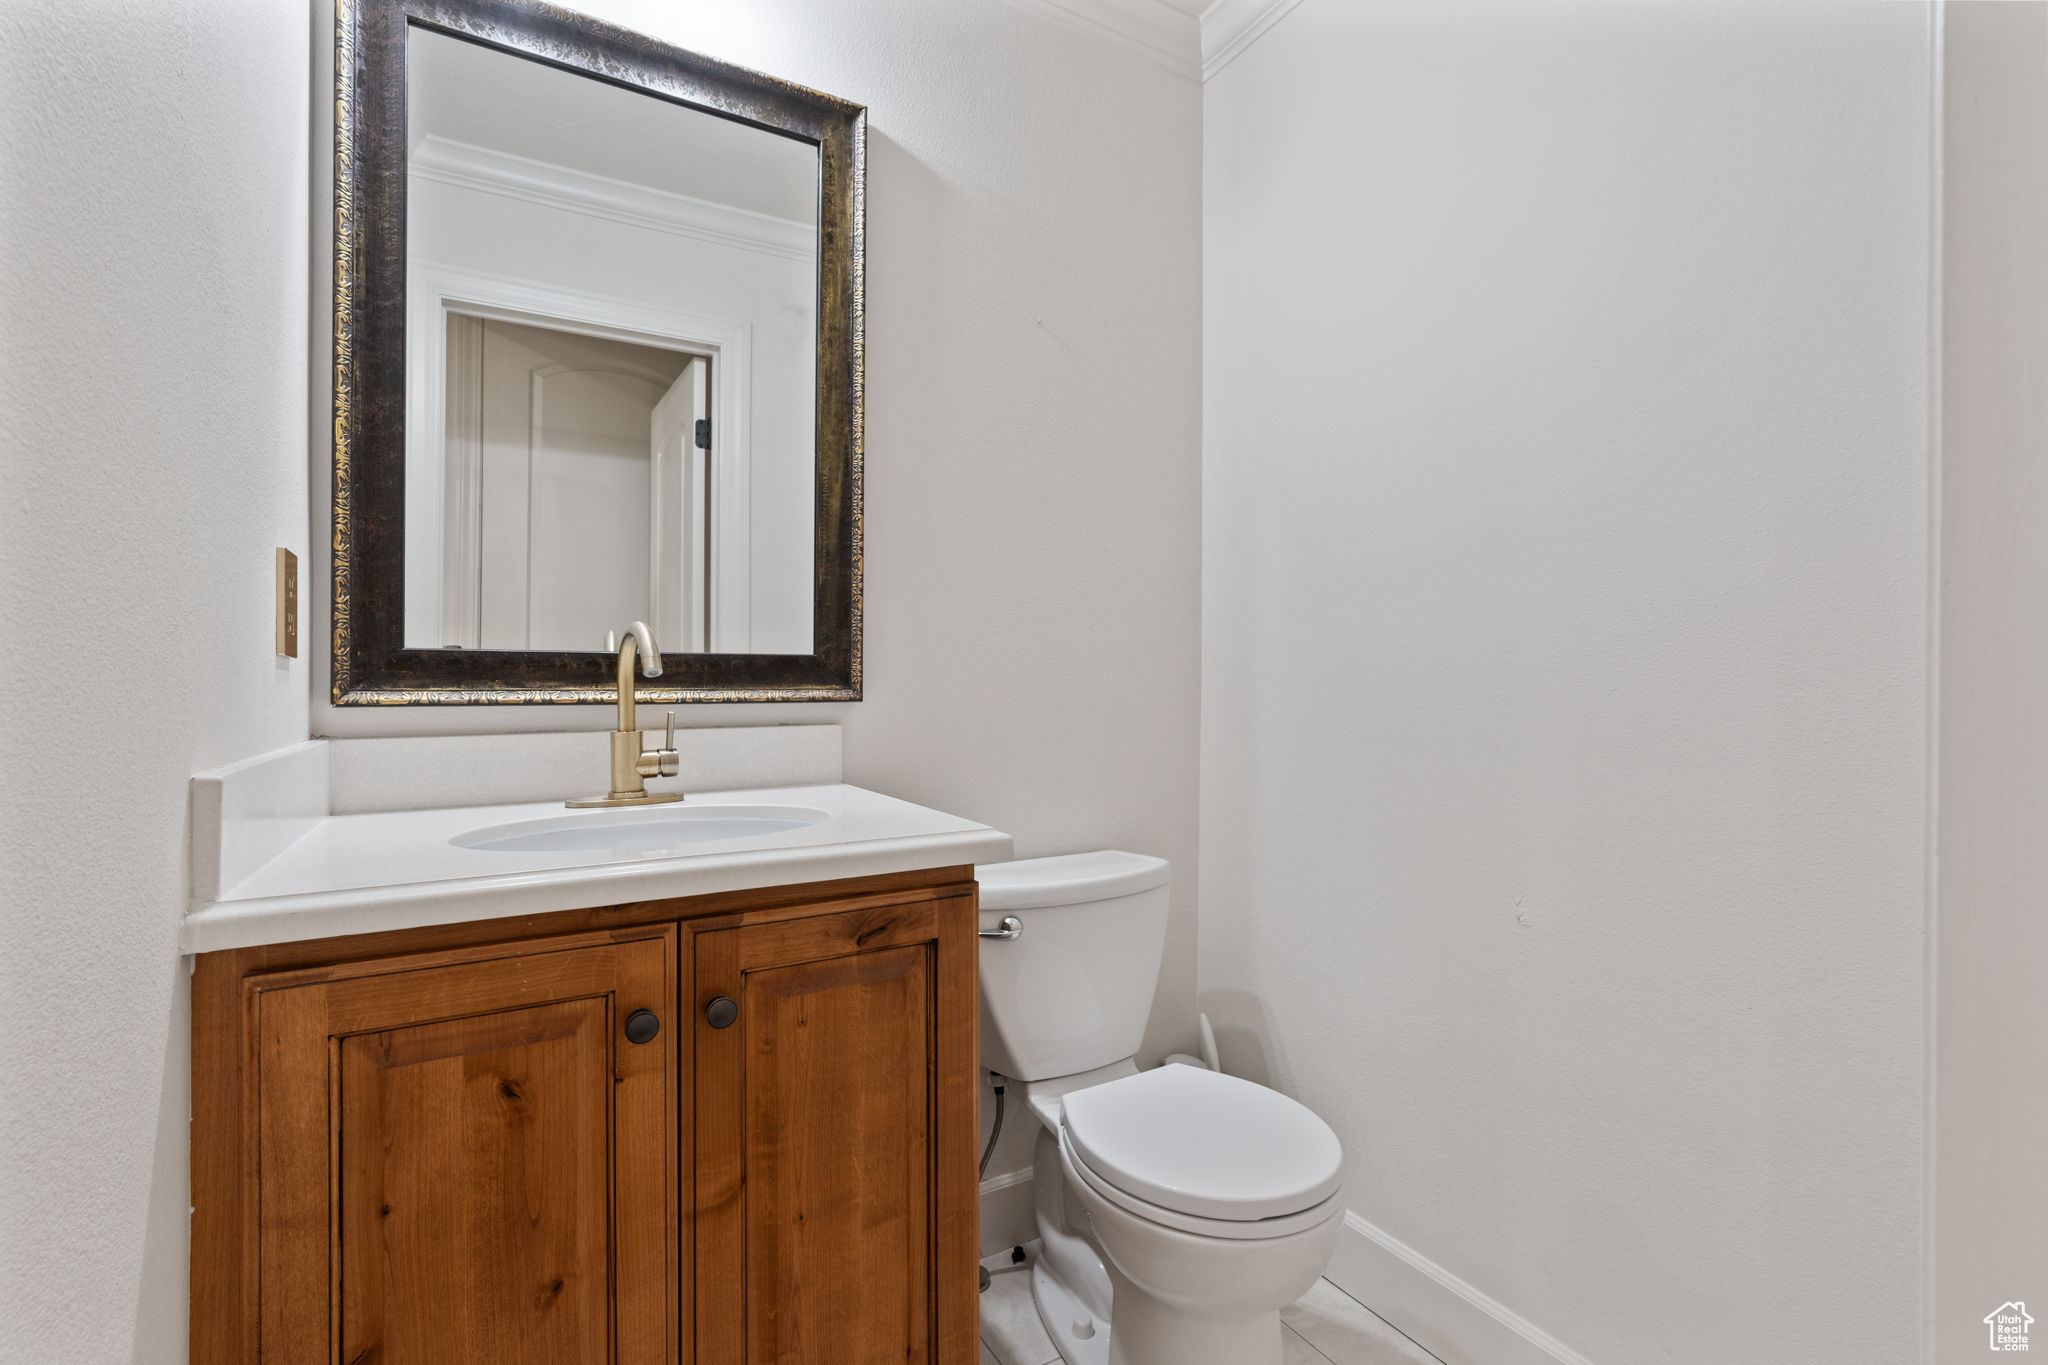 Bathroom with tile flooring, vanity with extensive cabinet space, toilet, and ornamental molding